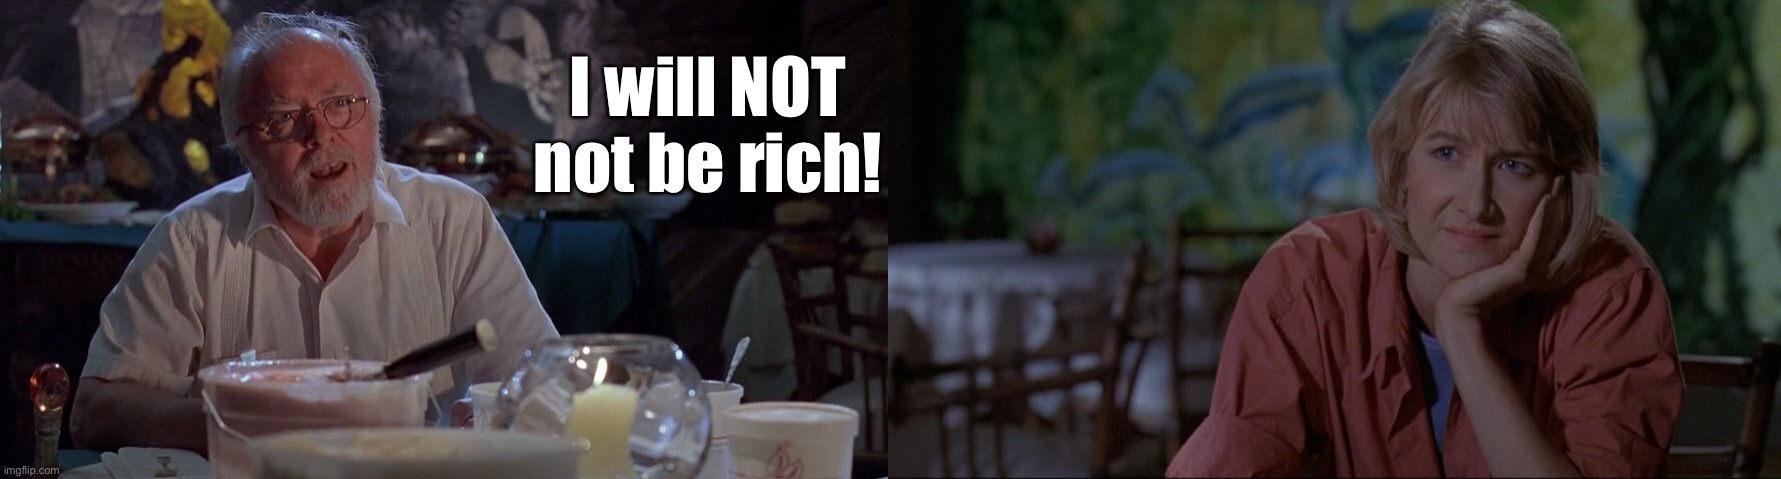 Jurassic Park Meets Big Little Lies | I will NOT not be rich! | image tagged in jurassic park,rich,wealth | made w/ Imgflip meme maker